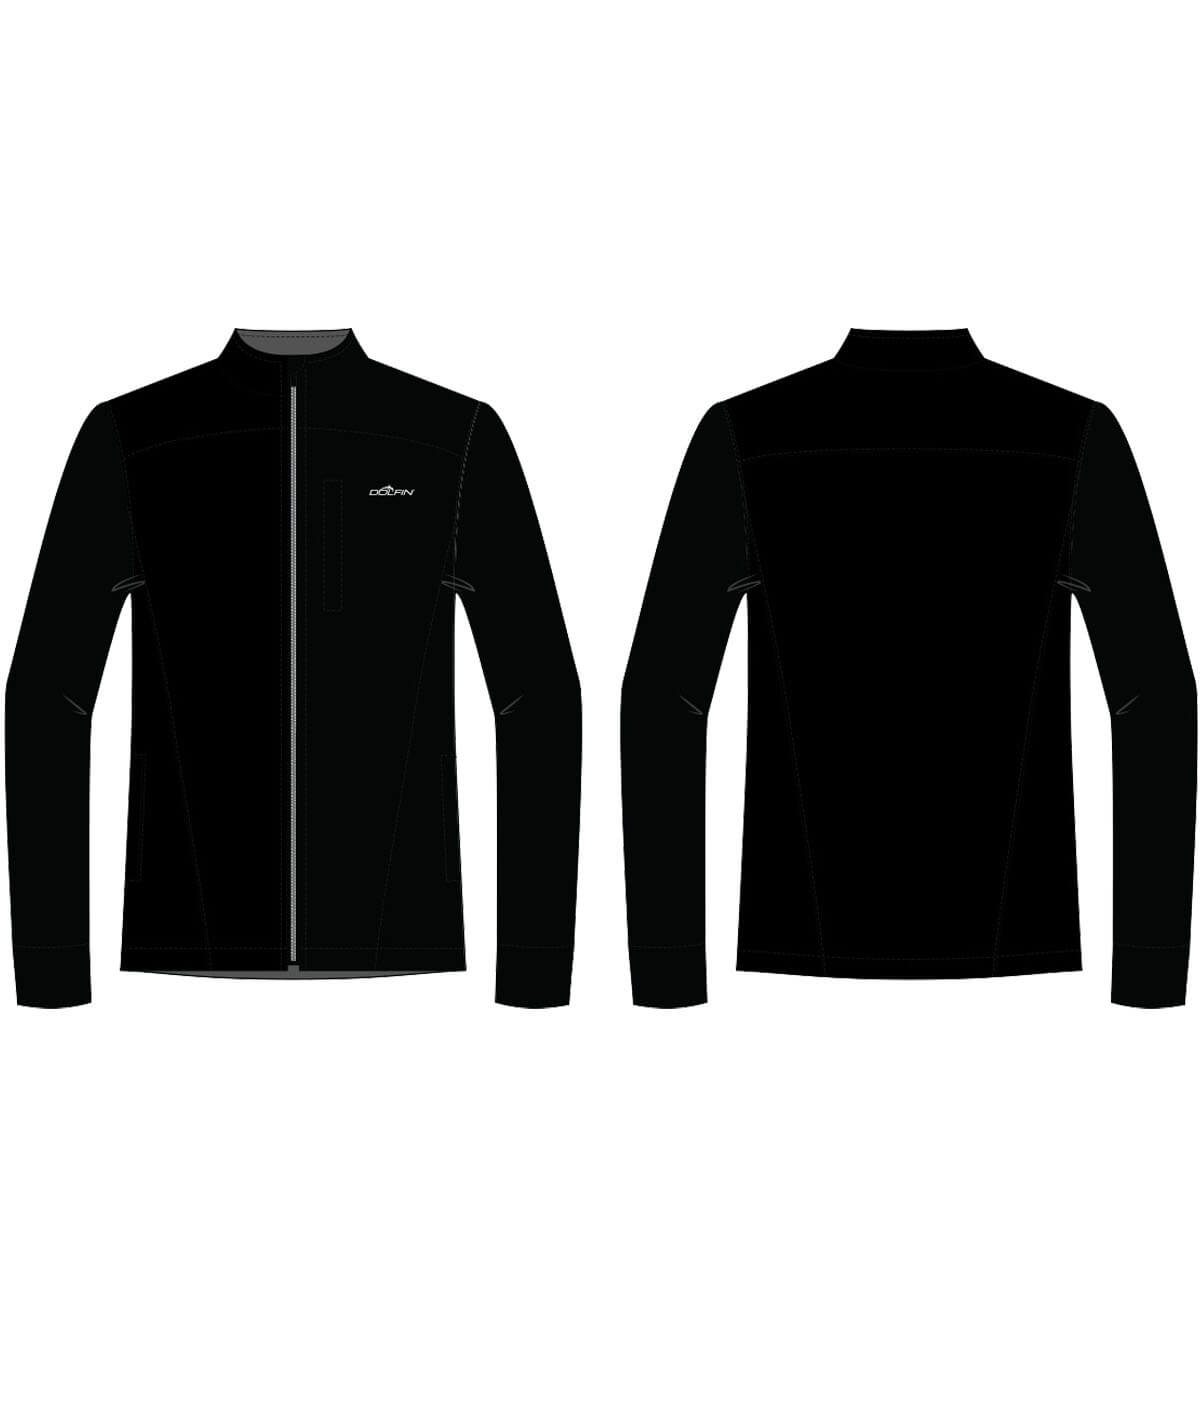 Fit Kit - Team Gear Youth Warm Up Jacket